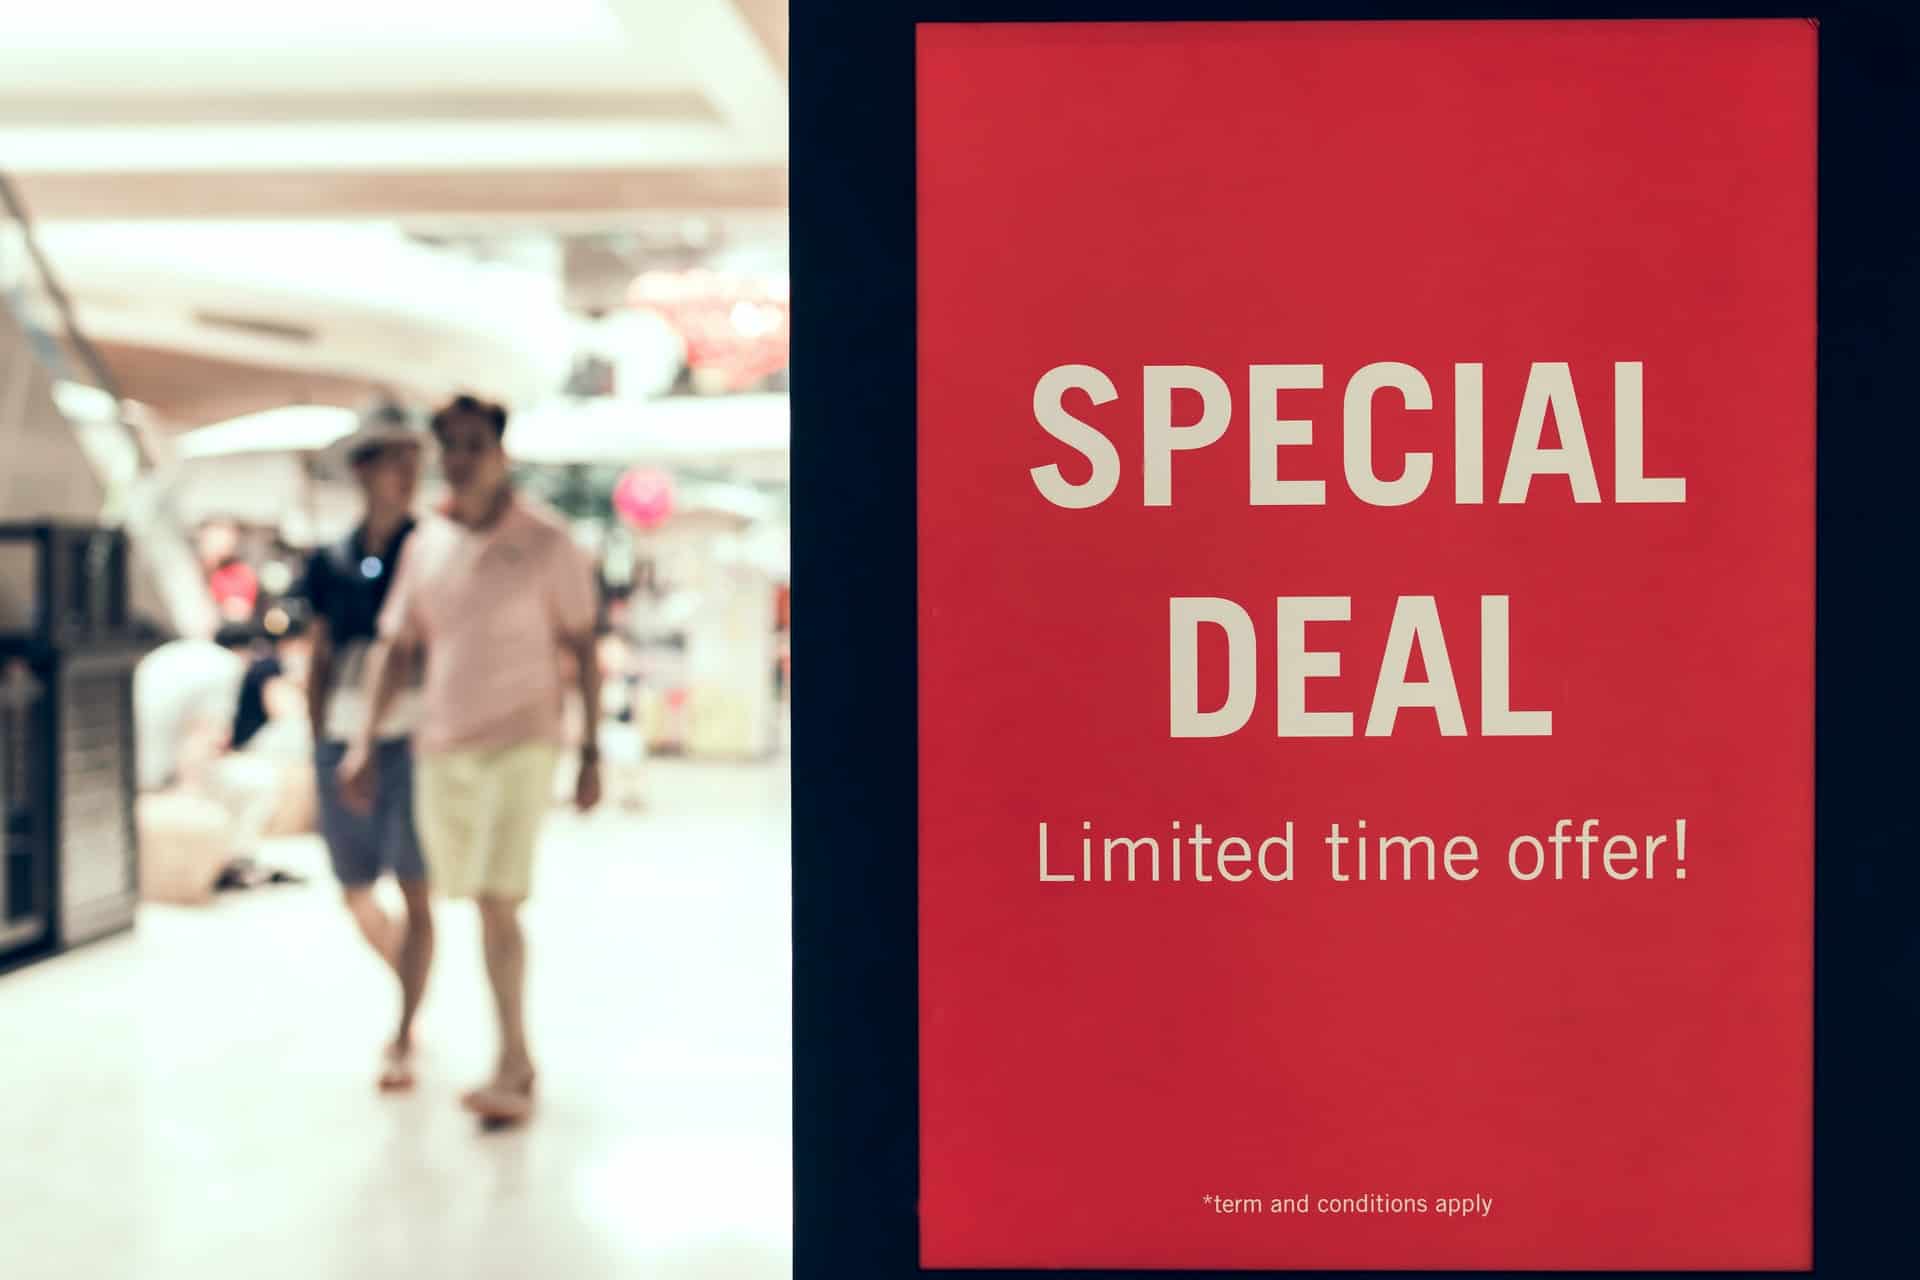 Special deal sign